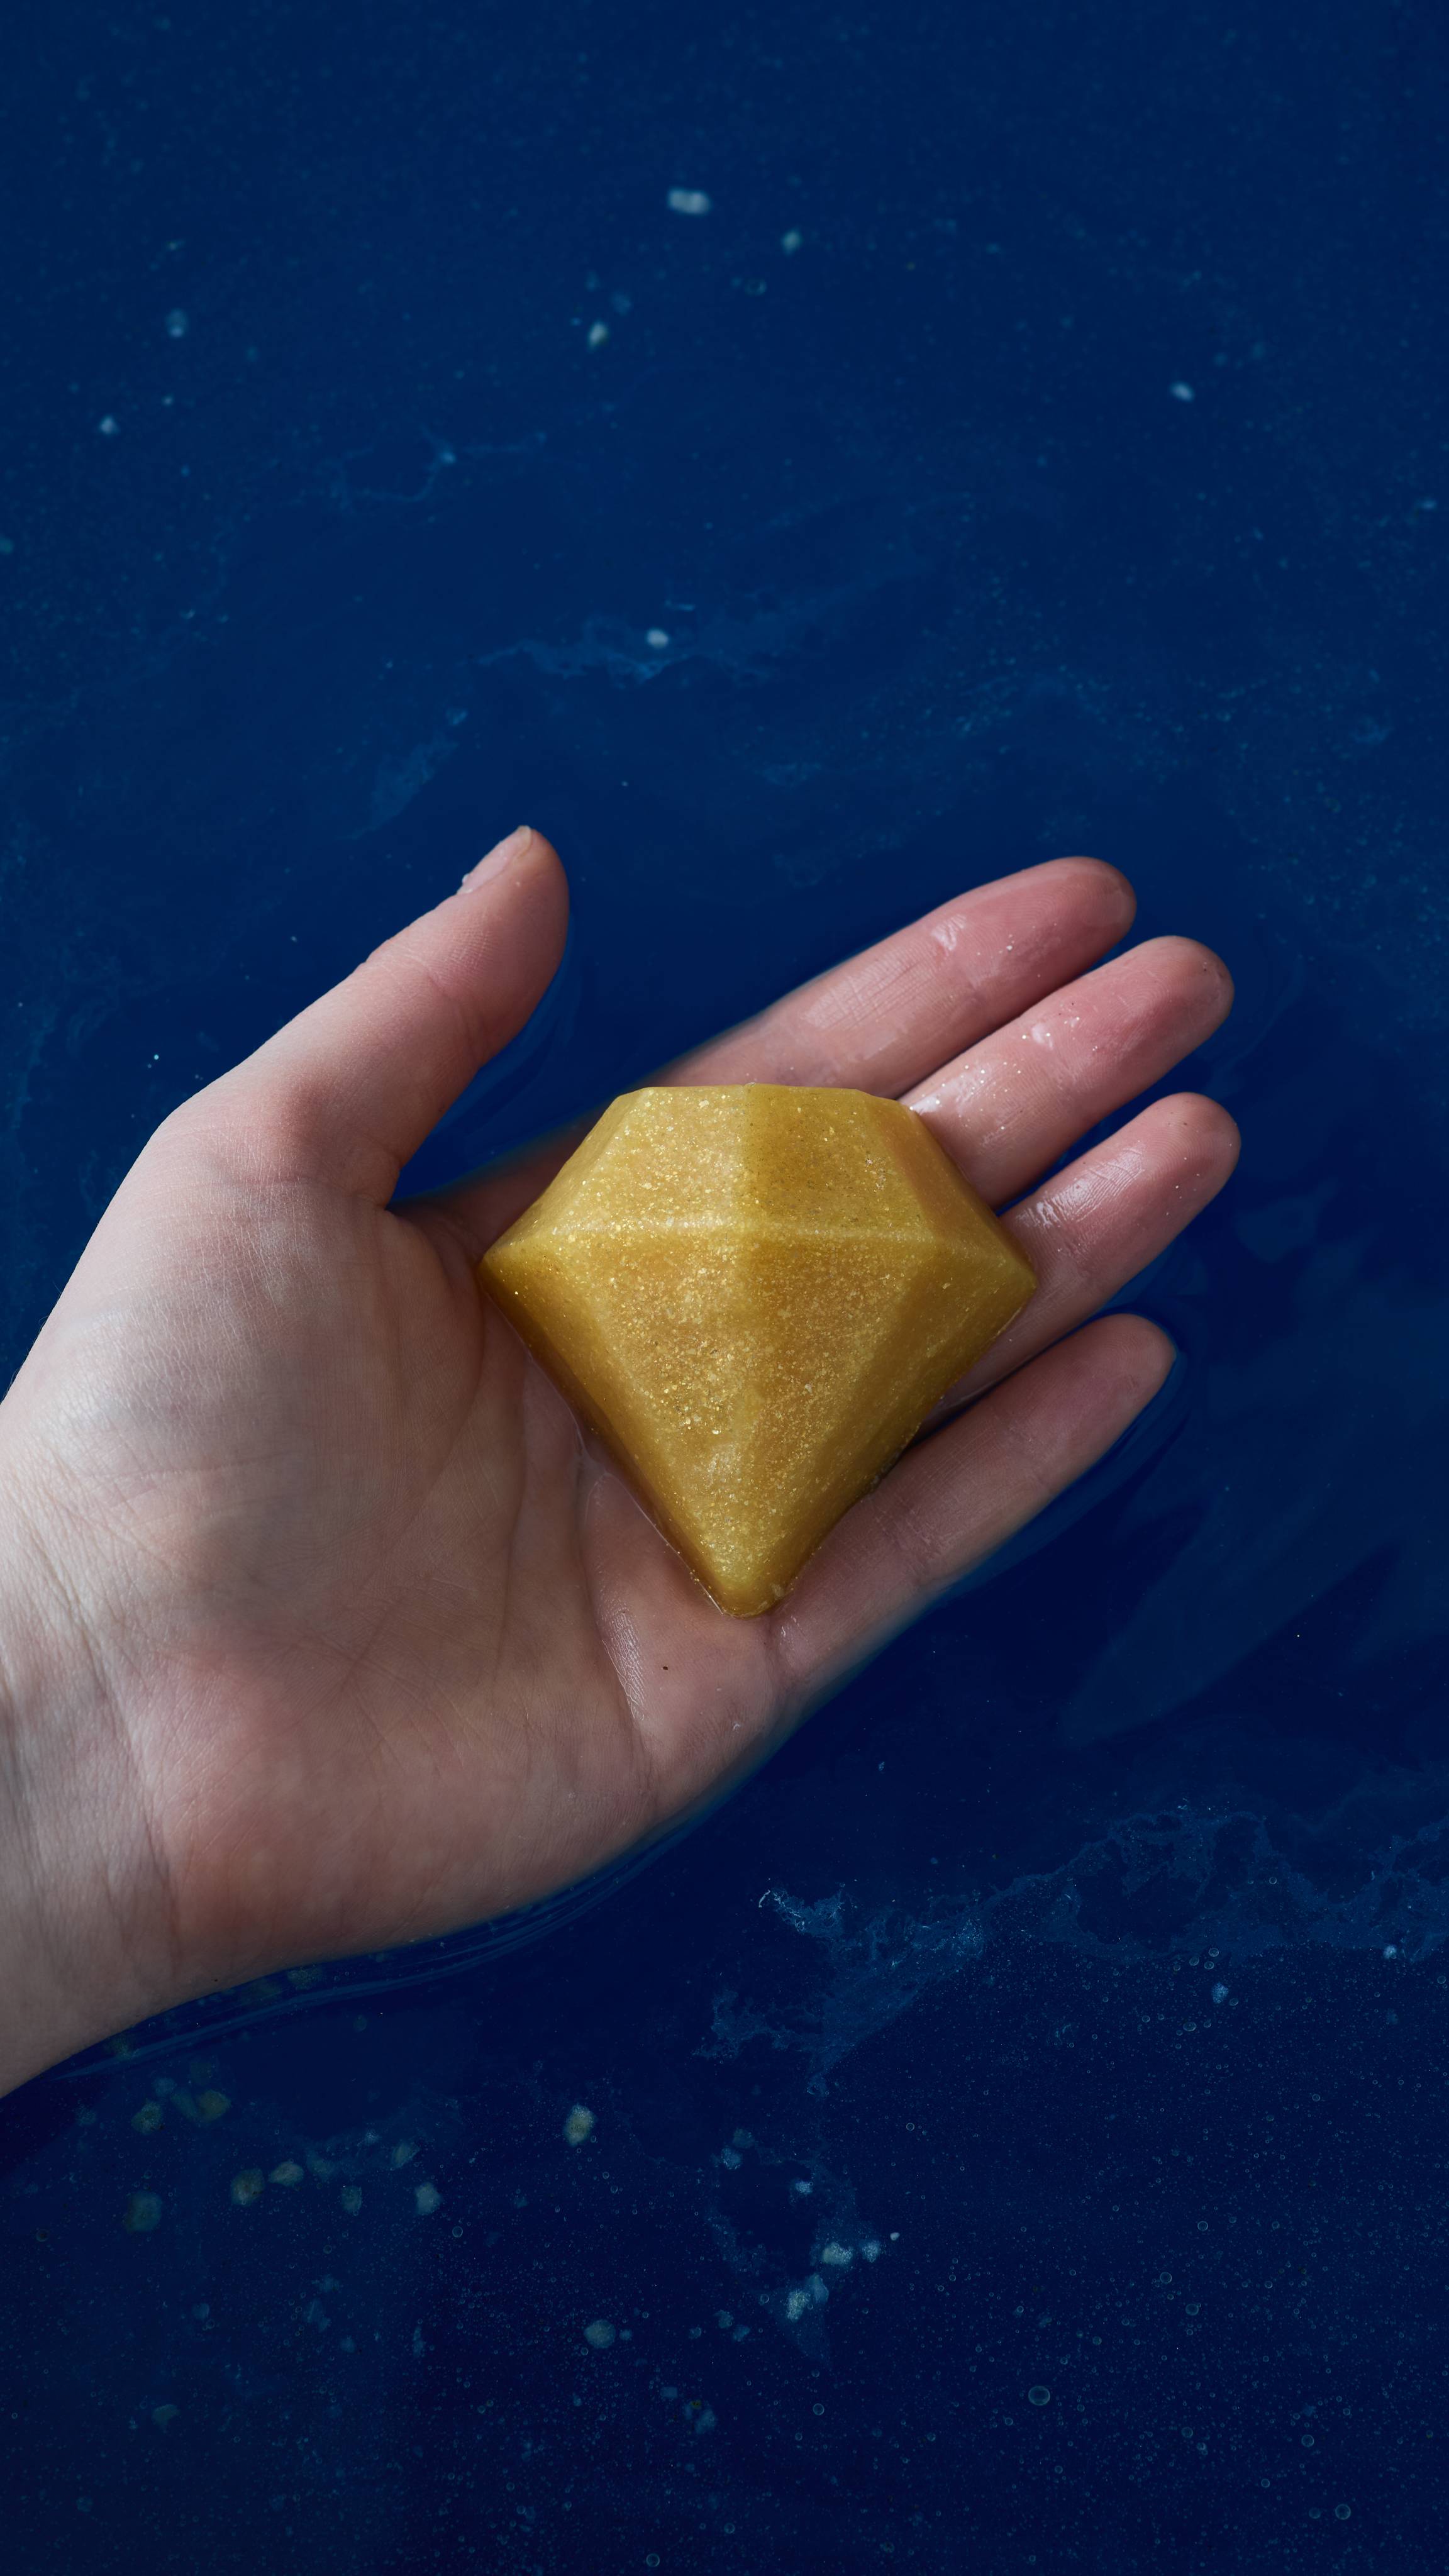 The image shows a close-up of the model's hand above deep, blue waters holding a golden, diamond-shaped soap. 